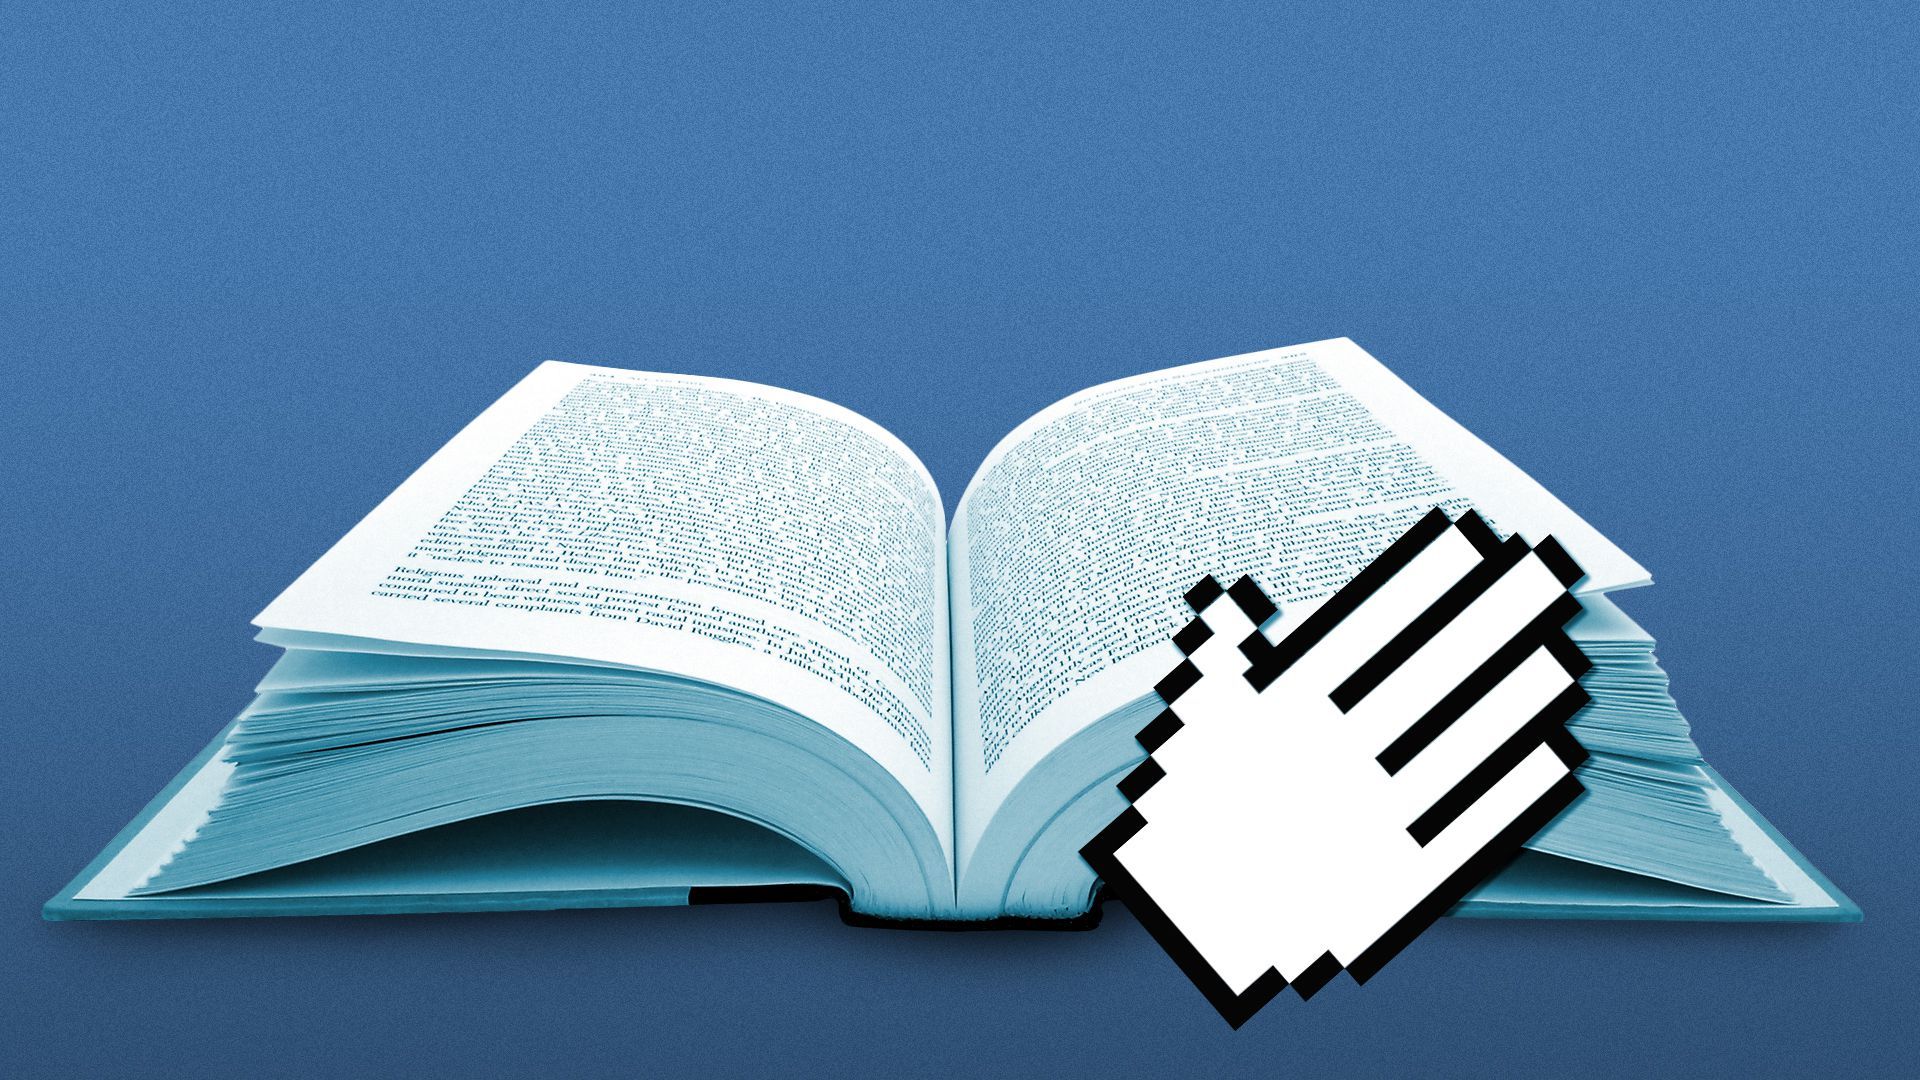 Illustration of a hand cursor resting on the pages of an open book.